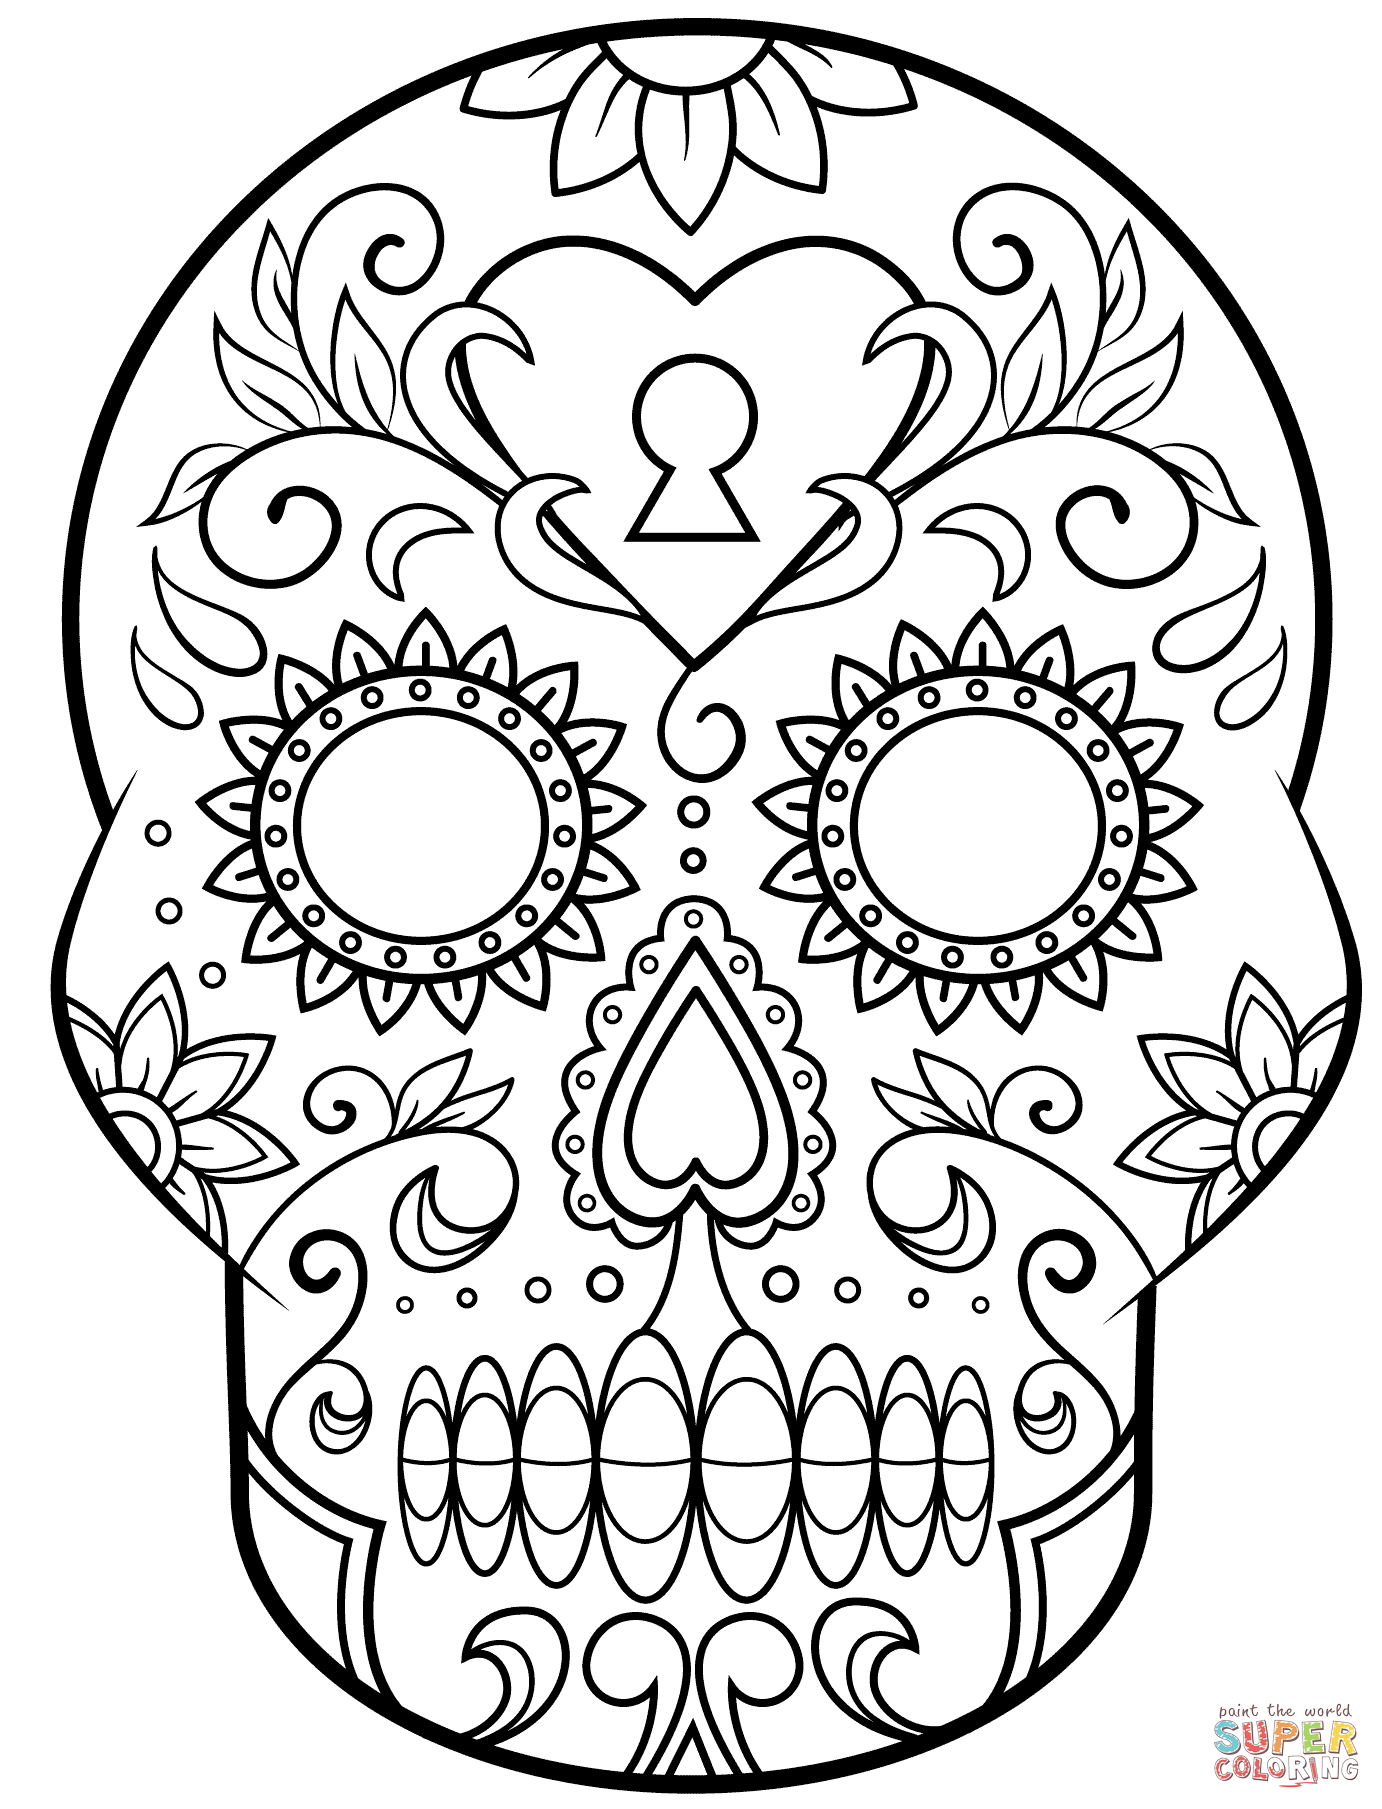 Day Of The Dead Sugar Skull Coloring Page | Free Printable - Free Printable Sugar Skull Coloring Pages